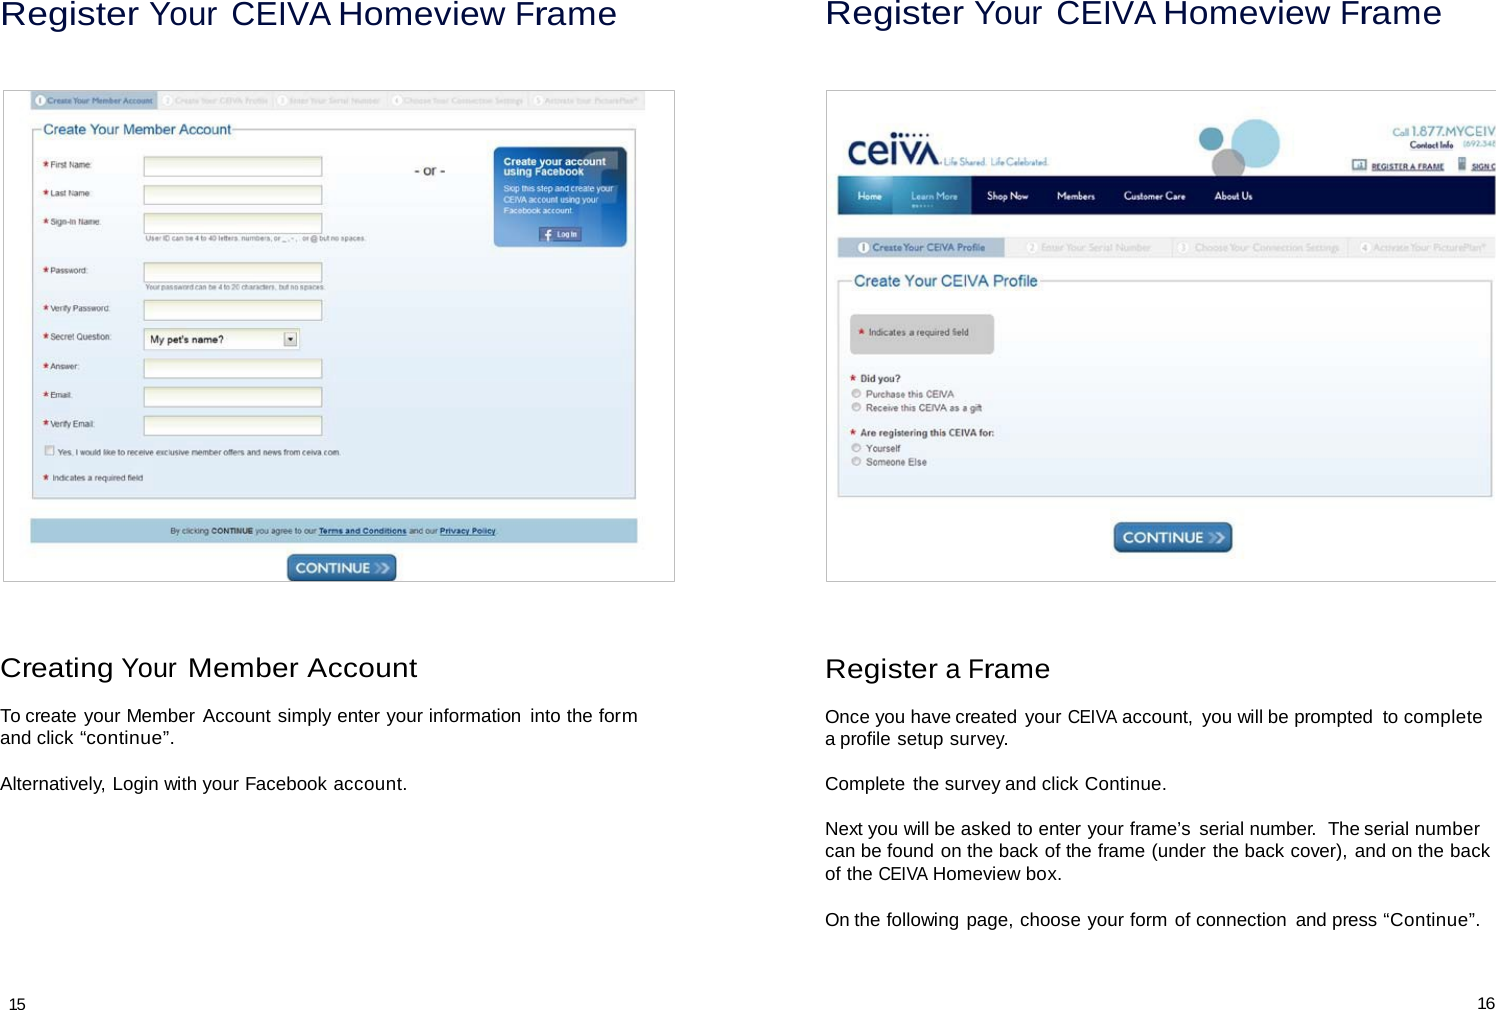 Register Your CEIVA Homeview Frame Register Your CEIVA Homeview Frame                                Creating Your Member Account  To create your Member Account simply enter your information  into the form and click “continue”.  Alternatively, Login with your Facebook account. Register a Frame  Once you have created your CEIVA account,  you will be prompted  to complete a profile setup survey.  Complete the survey and click Continue.  Next you will be asked to enter your frame’s  serial number.  The serial number can be found on the back of the frame (under the back cover), and on the back of the CEIVA Homeview box.  On the following page, choose your form of connection  and press “Continue”.    15 16 